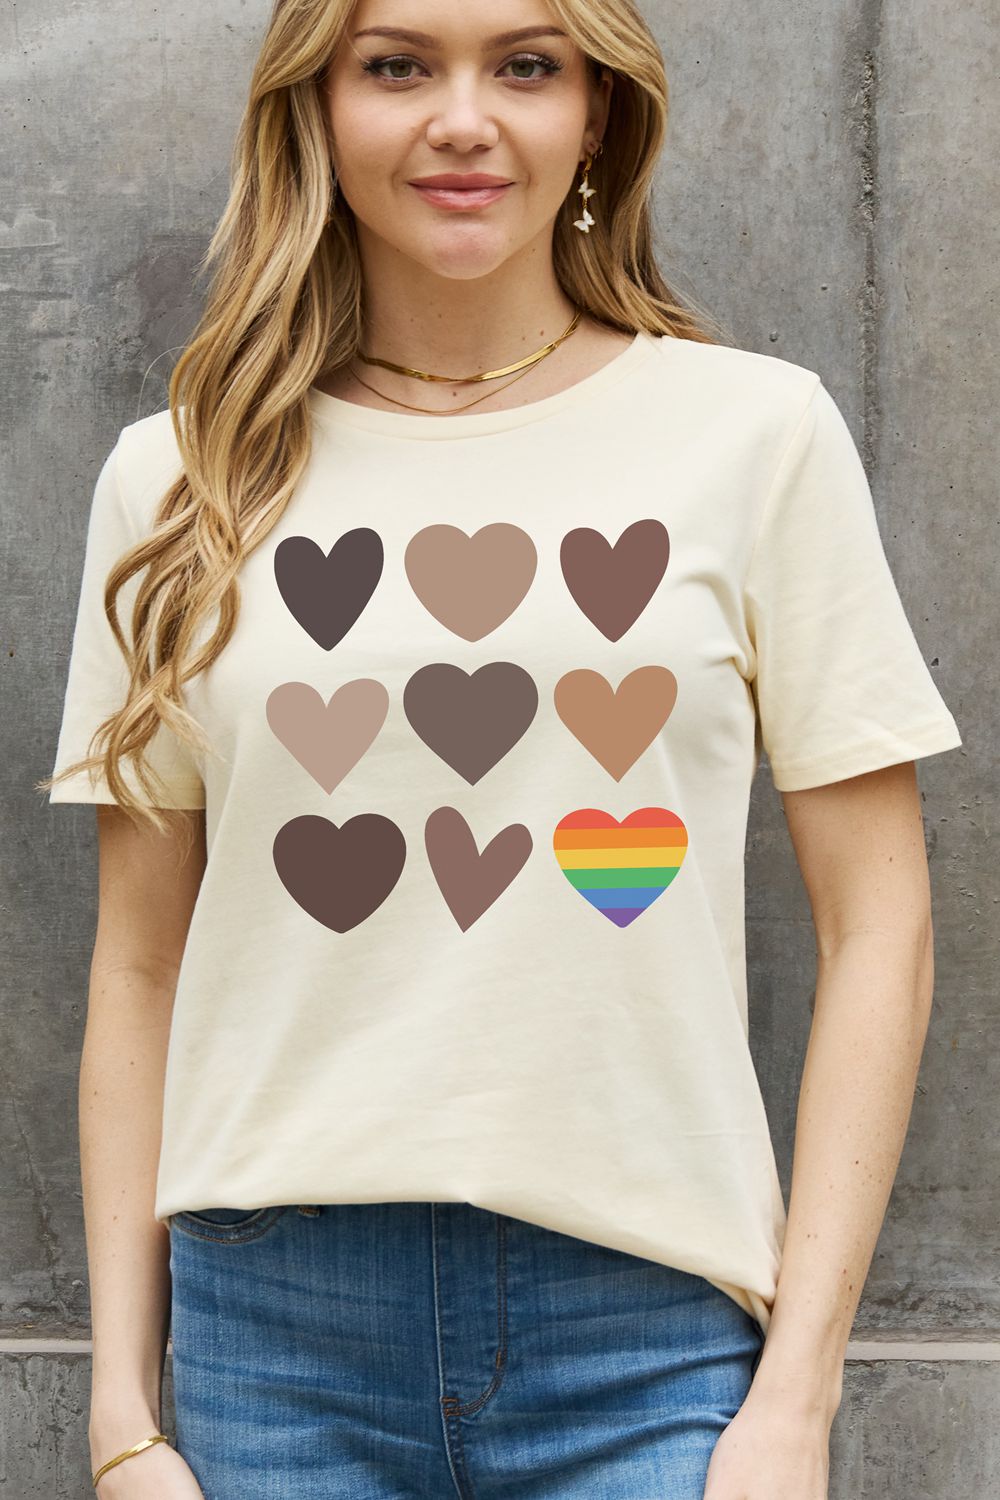 Rosy Brown Simply Love Full Size Heart Graphic Cotton Tee Sentient Beauty Fashions Apparel & Accessories